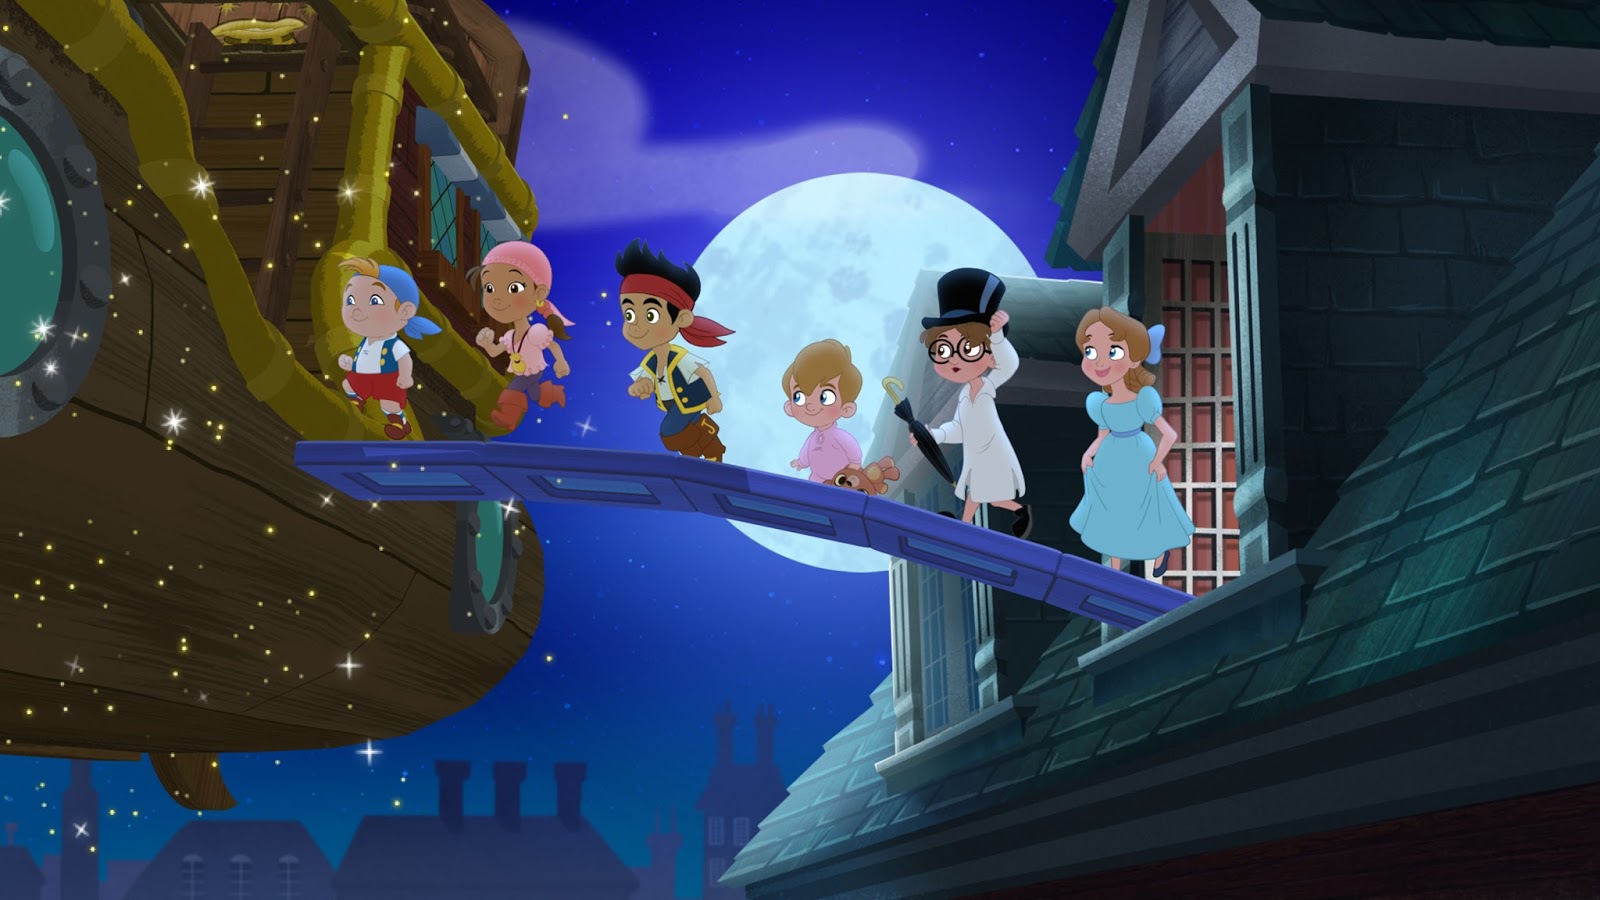 Jake and his crew of kid pirates take flight over London in Disney Junior's "Jake and the Never Land Pirates: Battle for the Book!," a primetime special